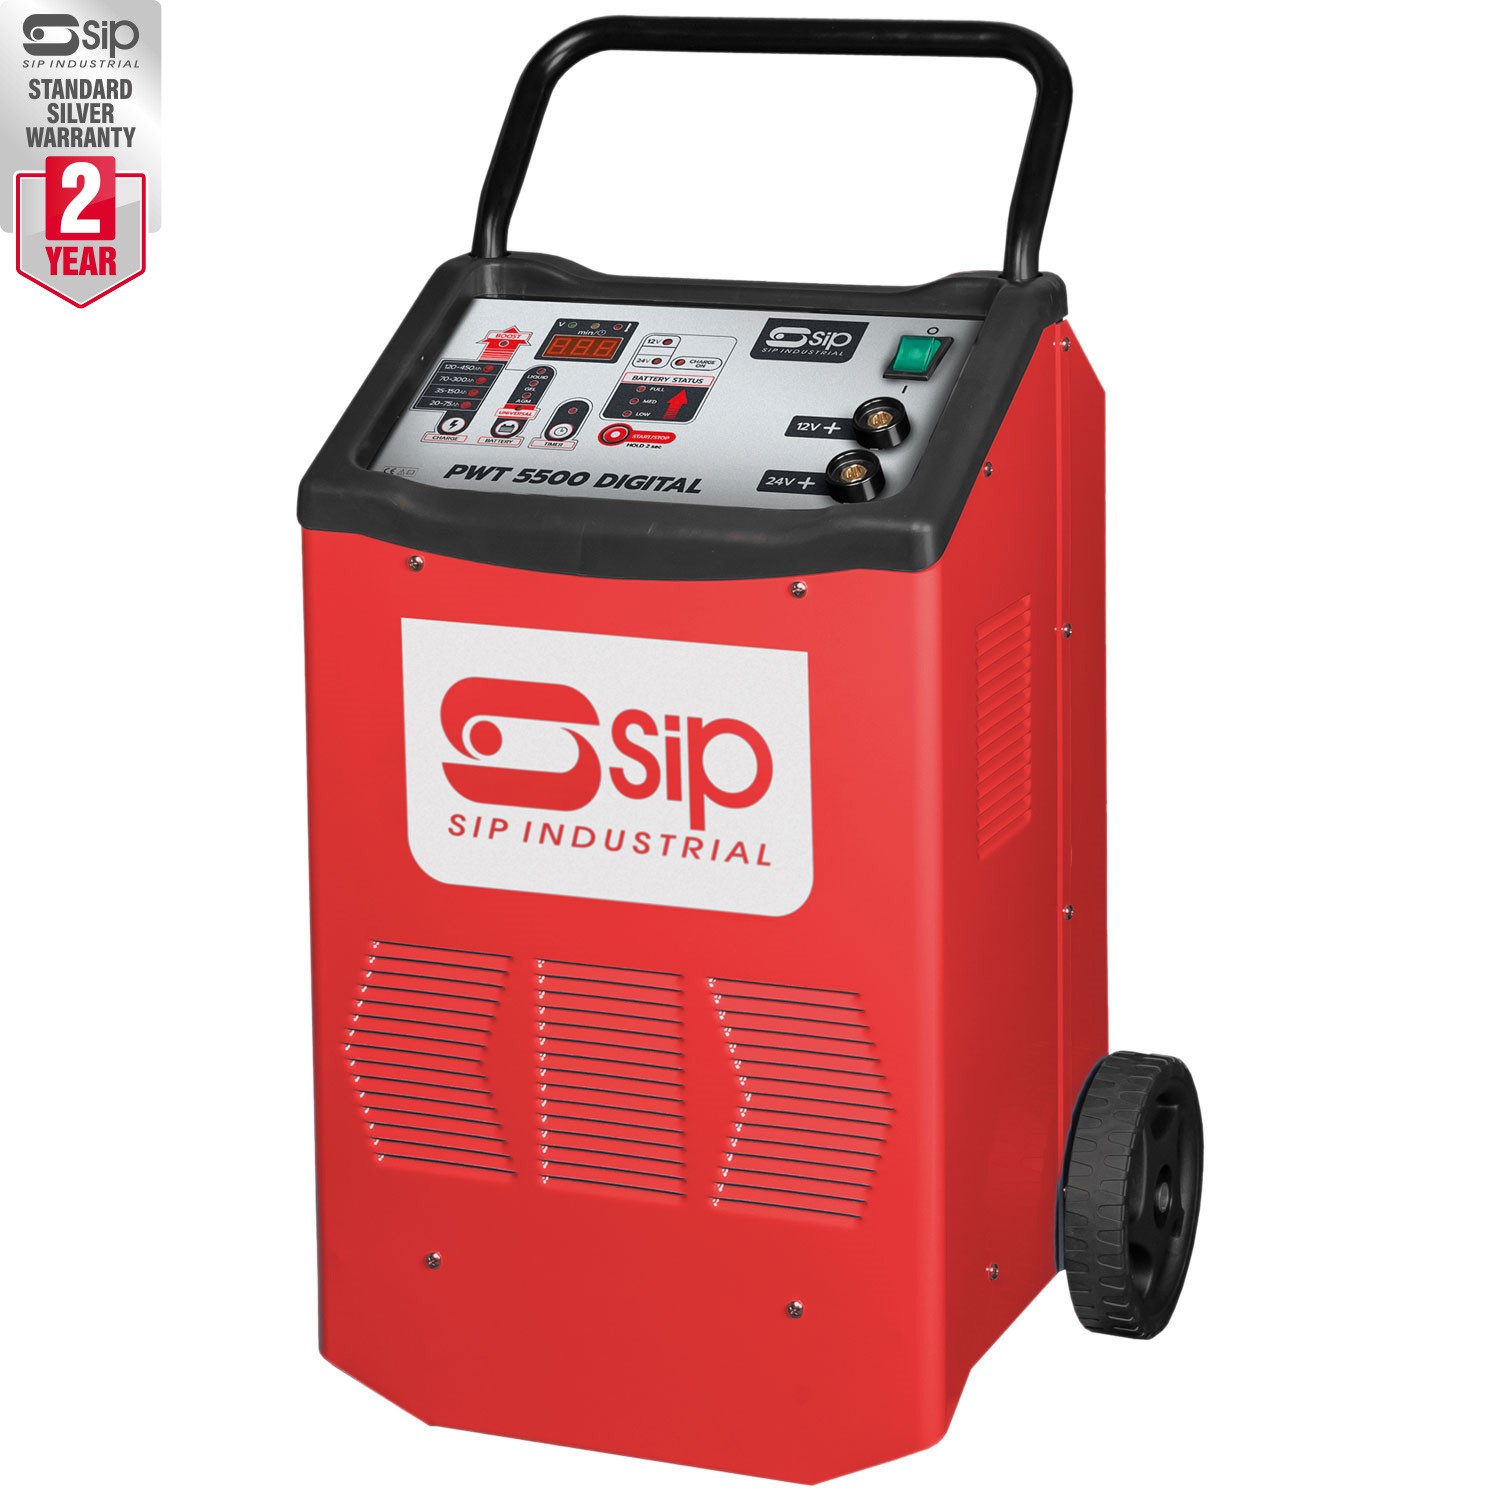 SIP Startmaster PWT5500 Starter Charger